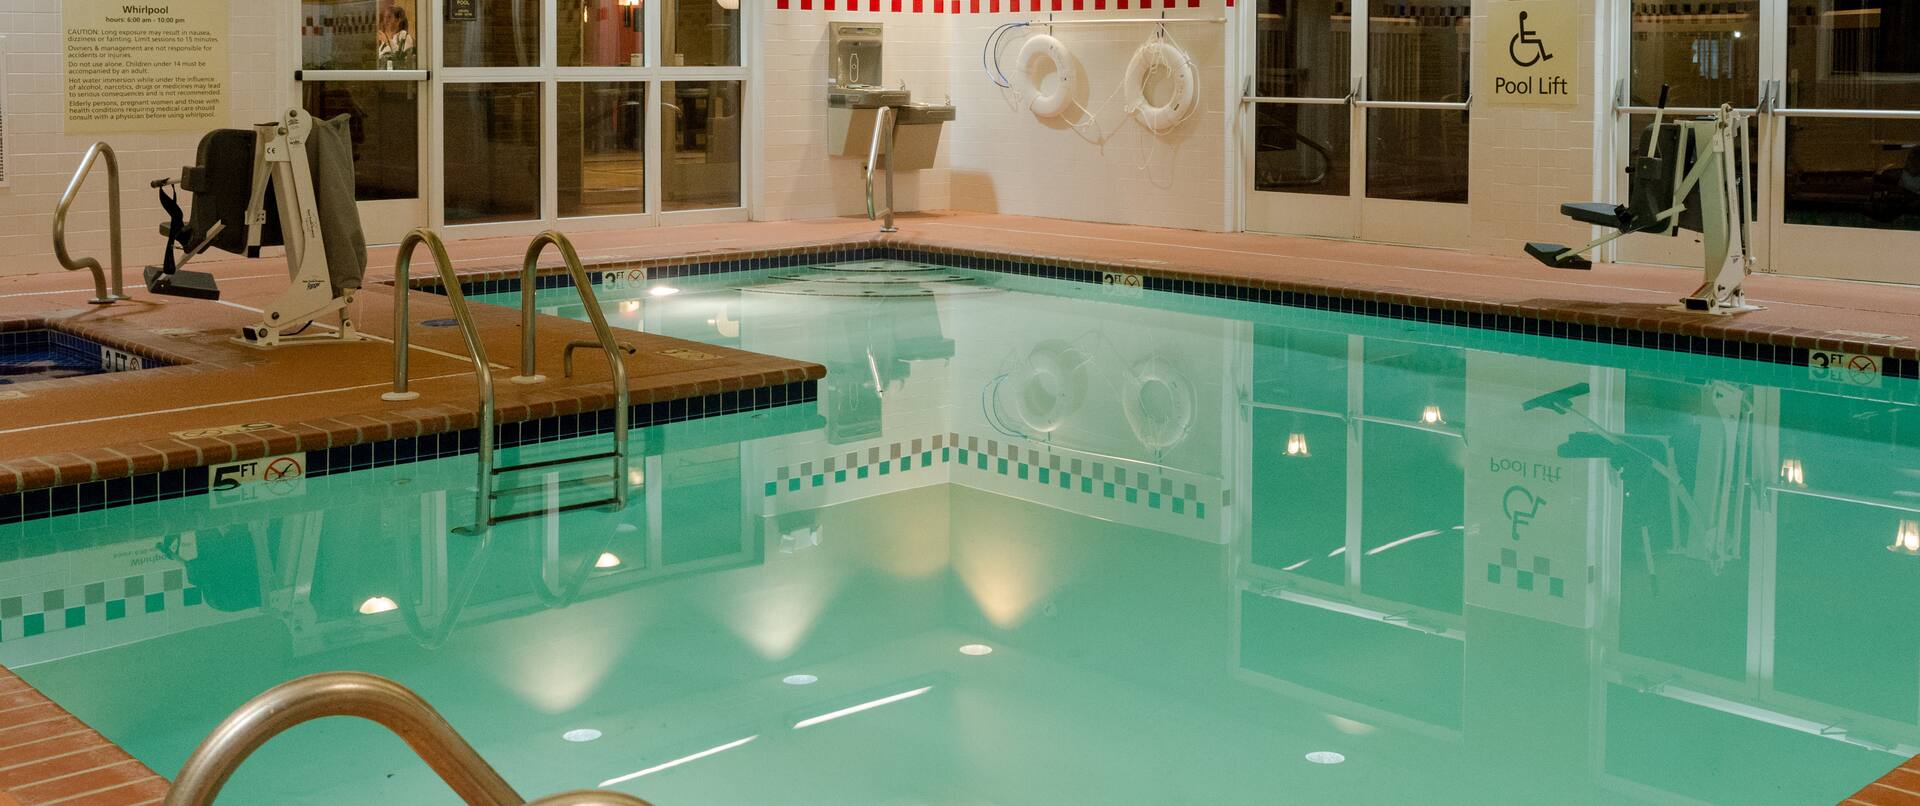 Indoor Pool and Whirlpool